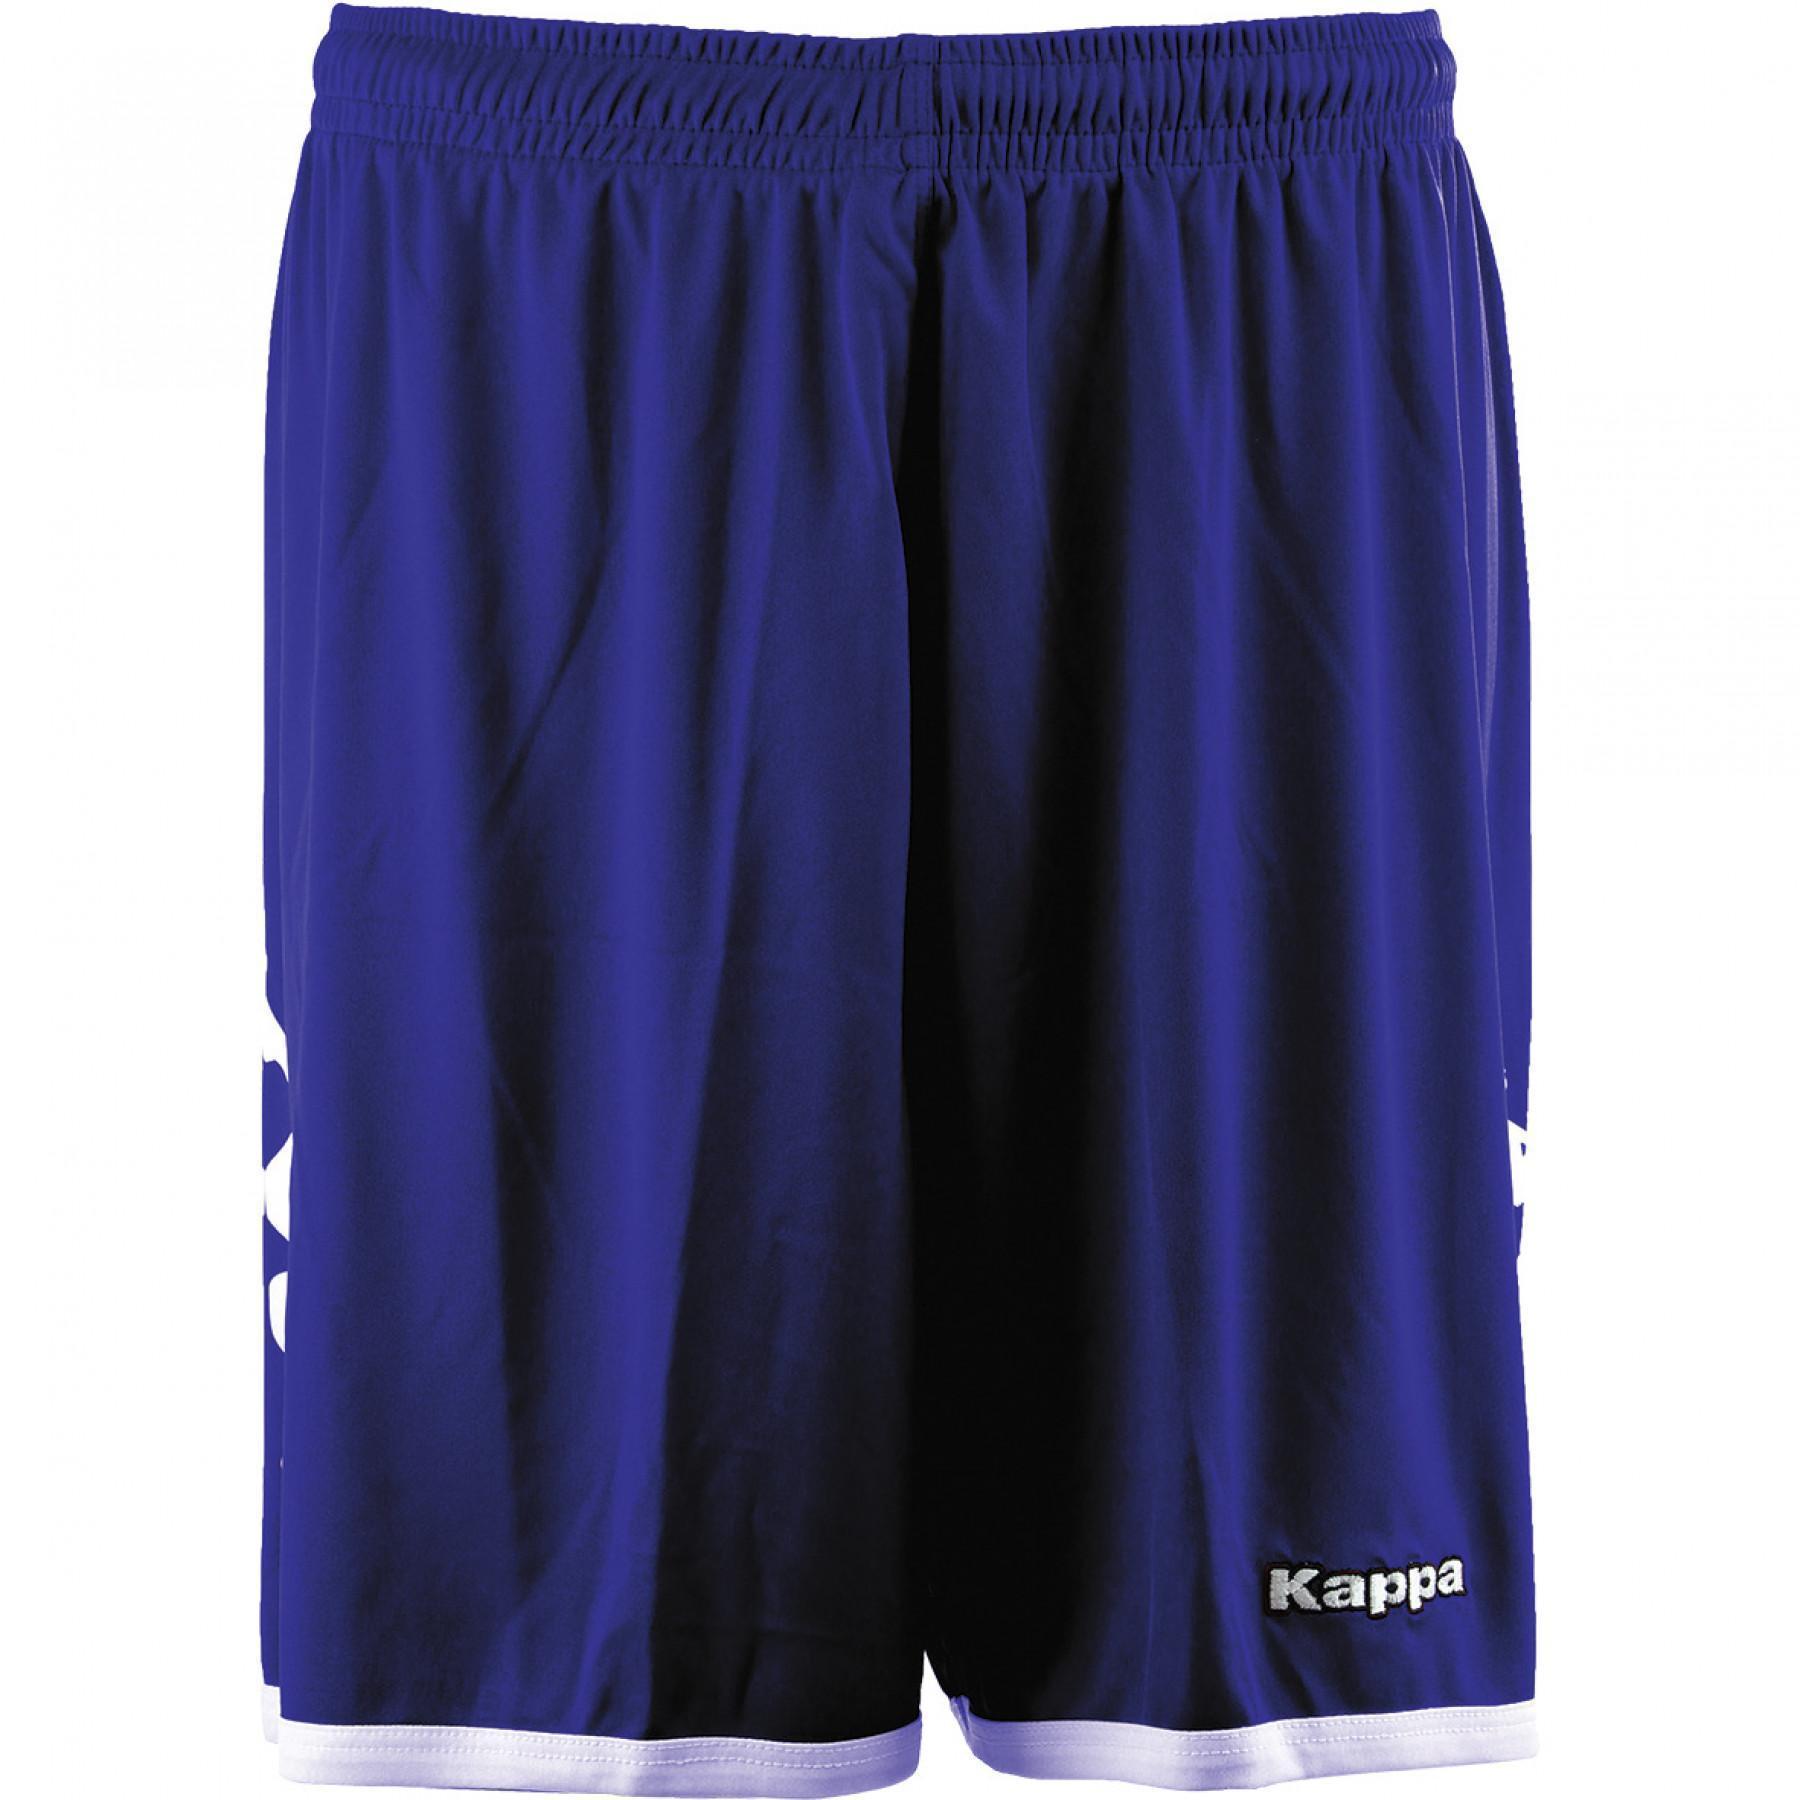 Various Details about   Kappa Salerne Football Shorts 